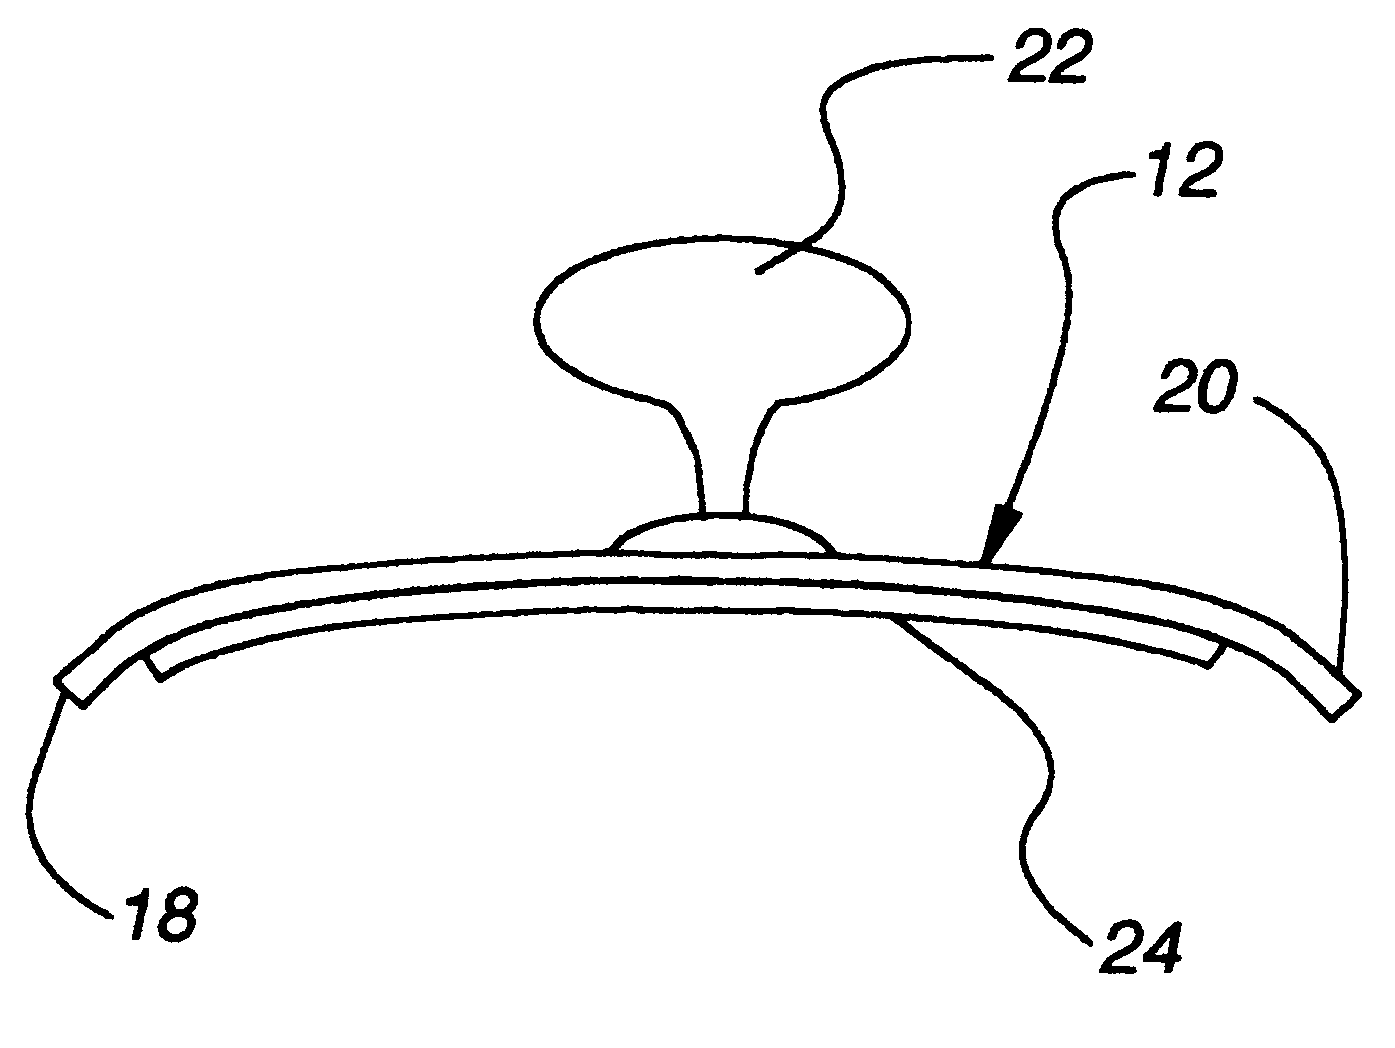 Device for applying liquid to vehicle tires